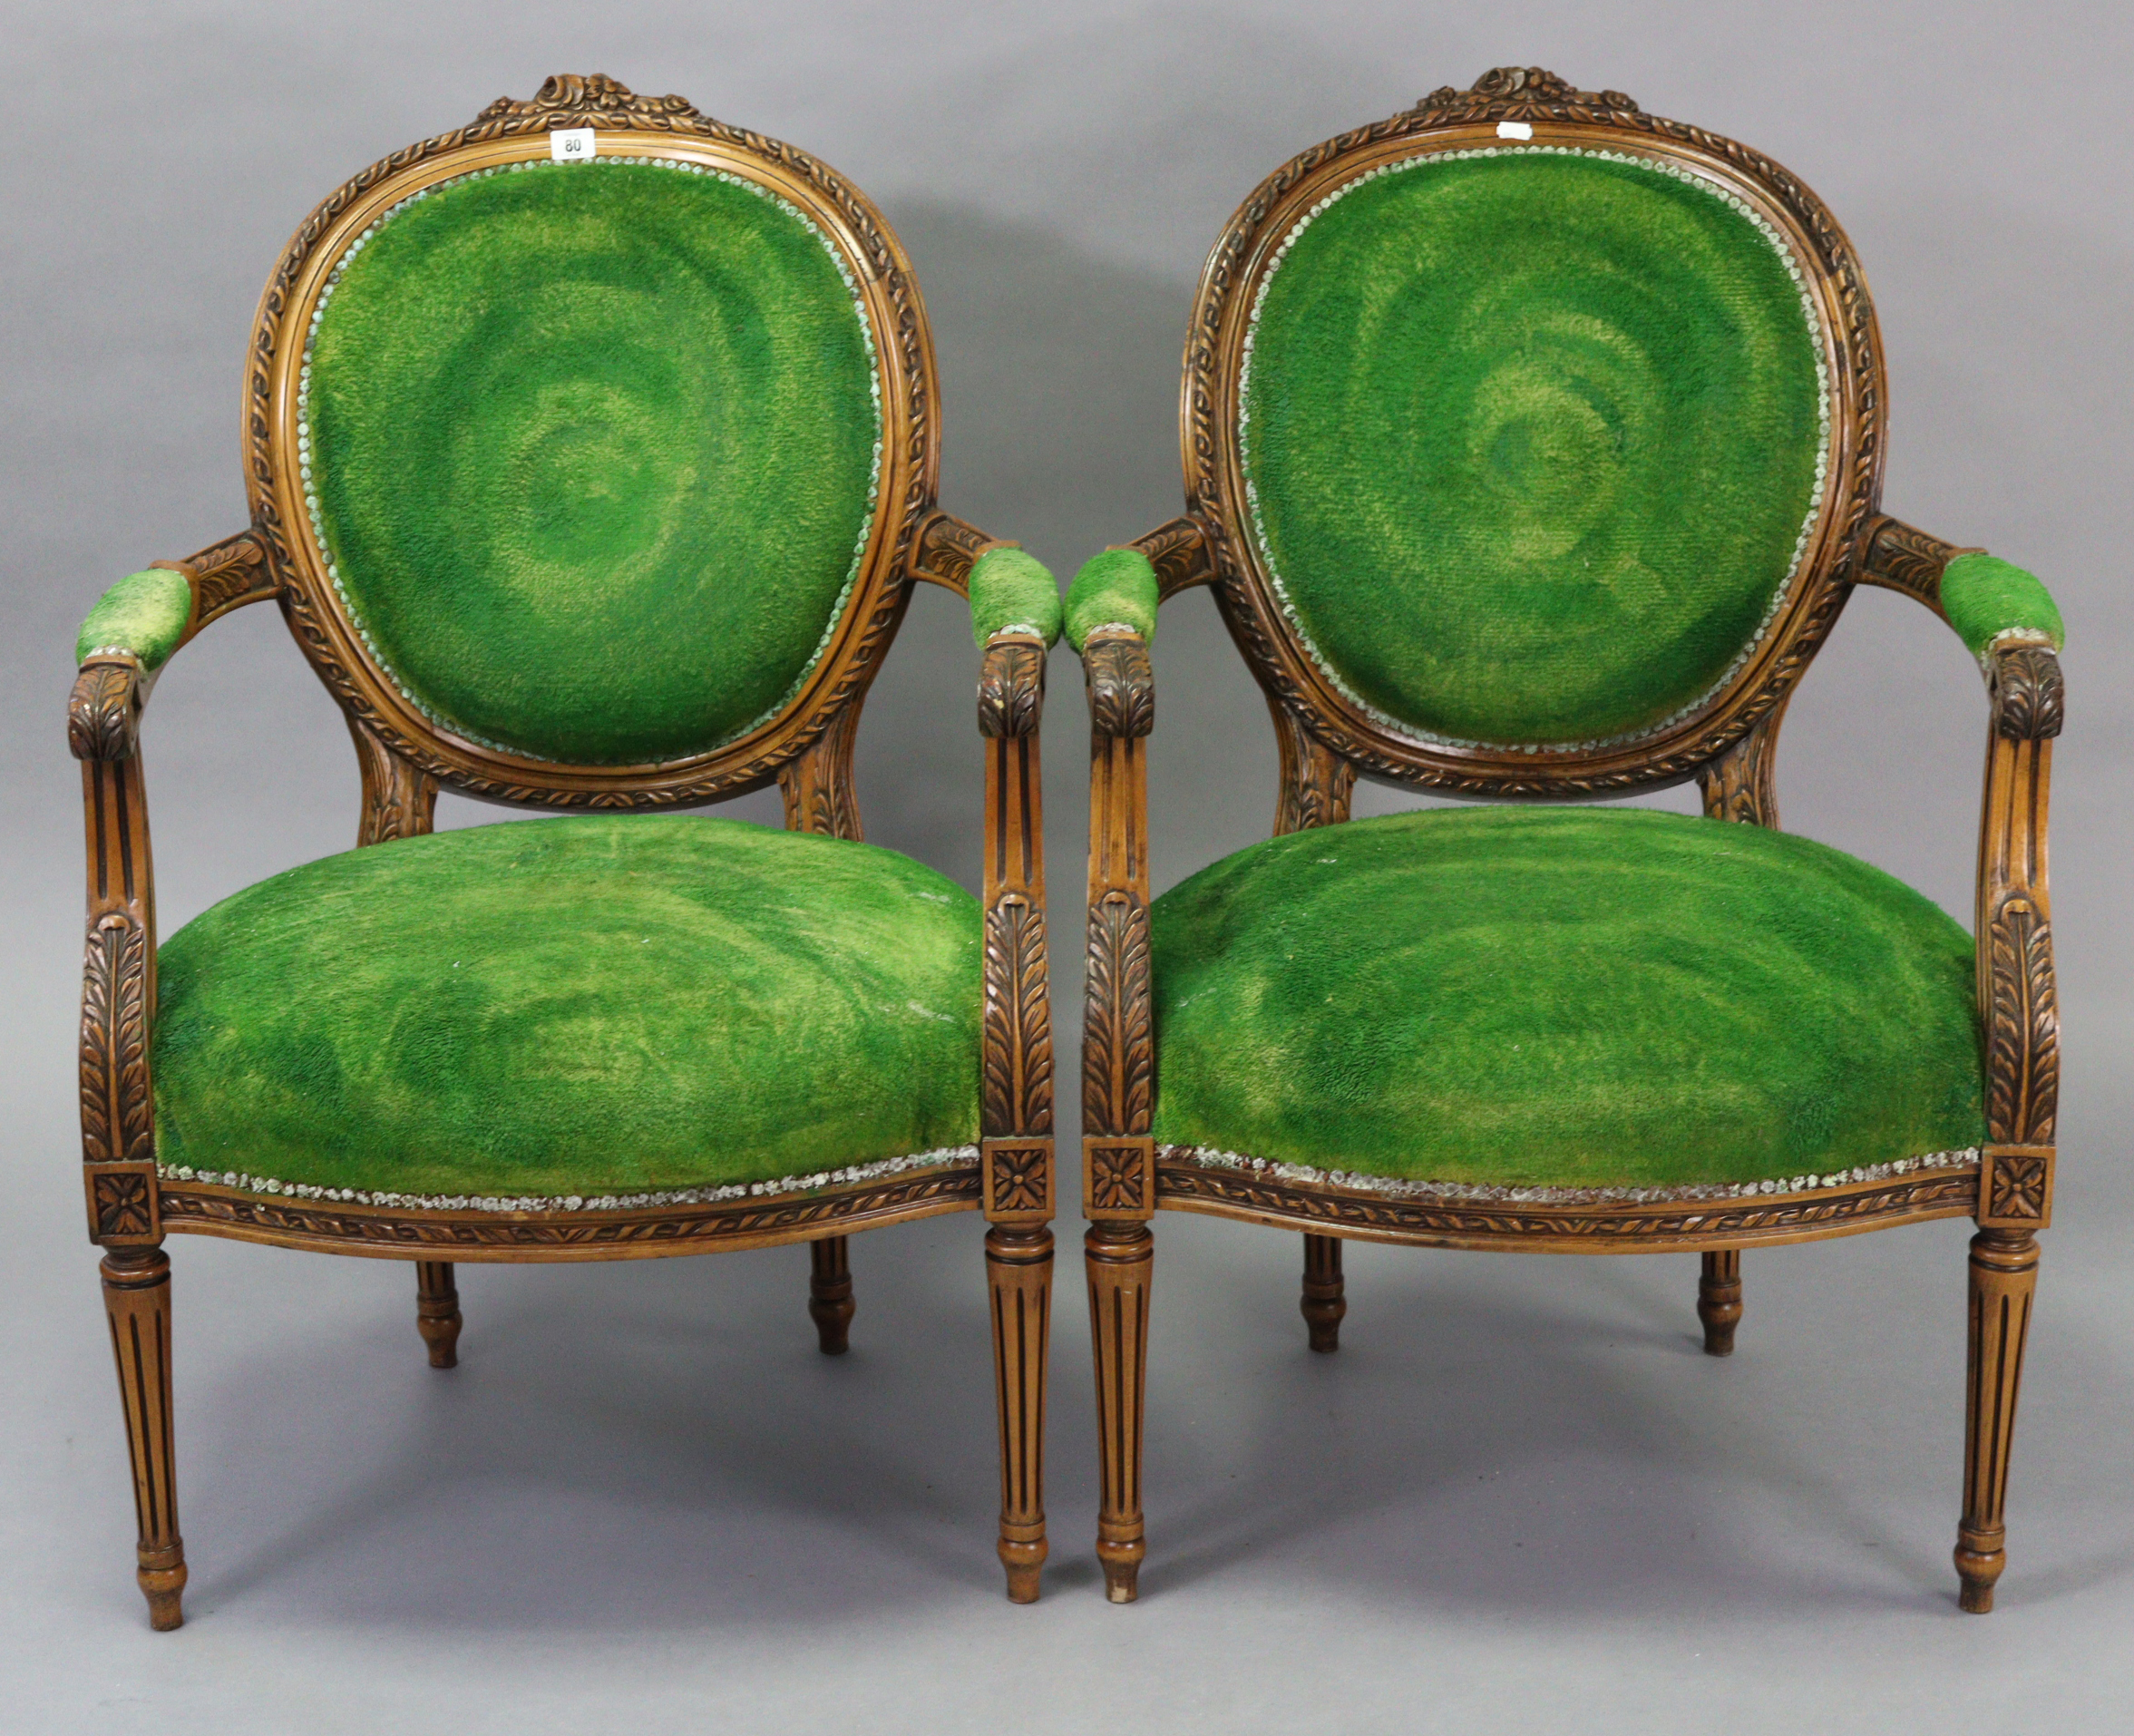 A pair of Louis XVI-style carved beech frame armchairs with padded seats & backs upholstered green